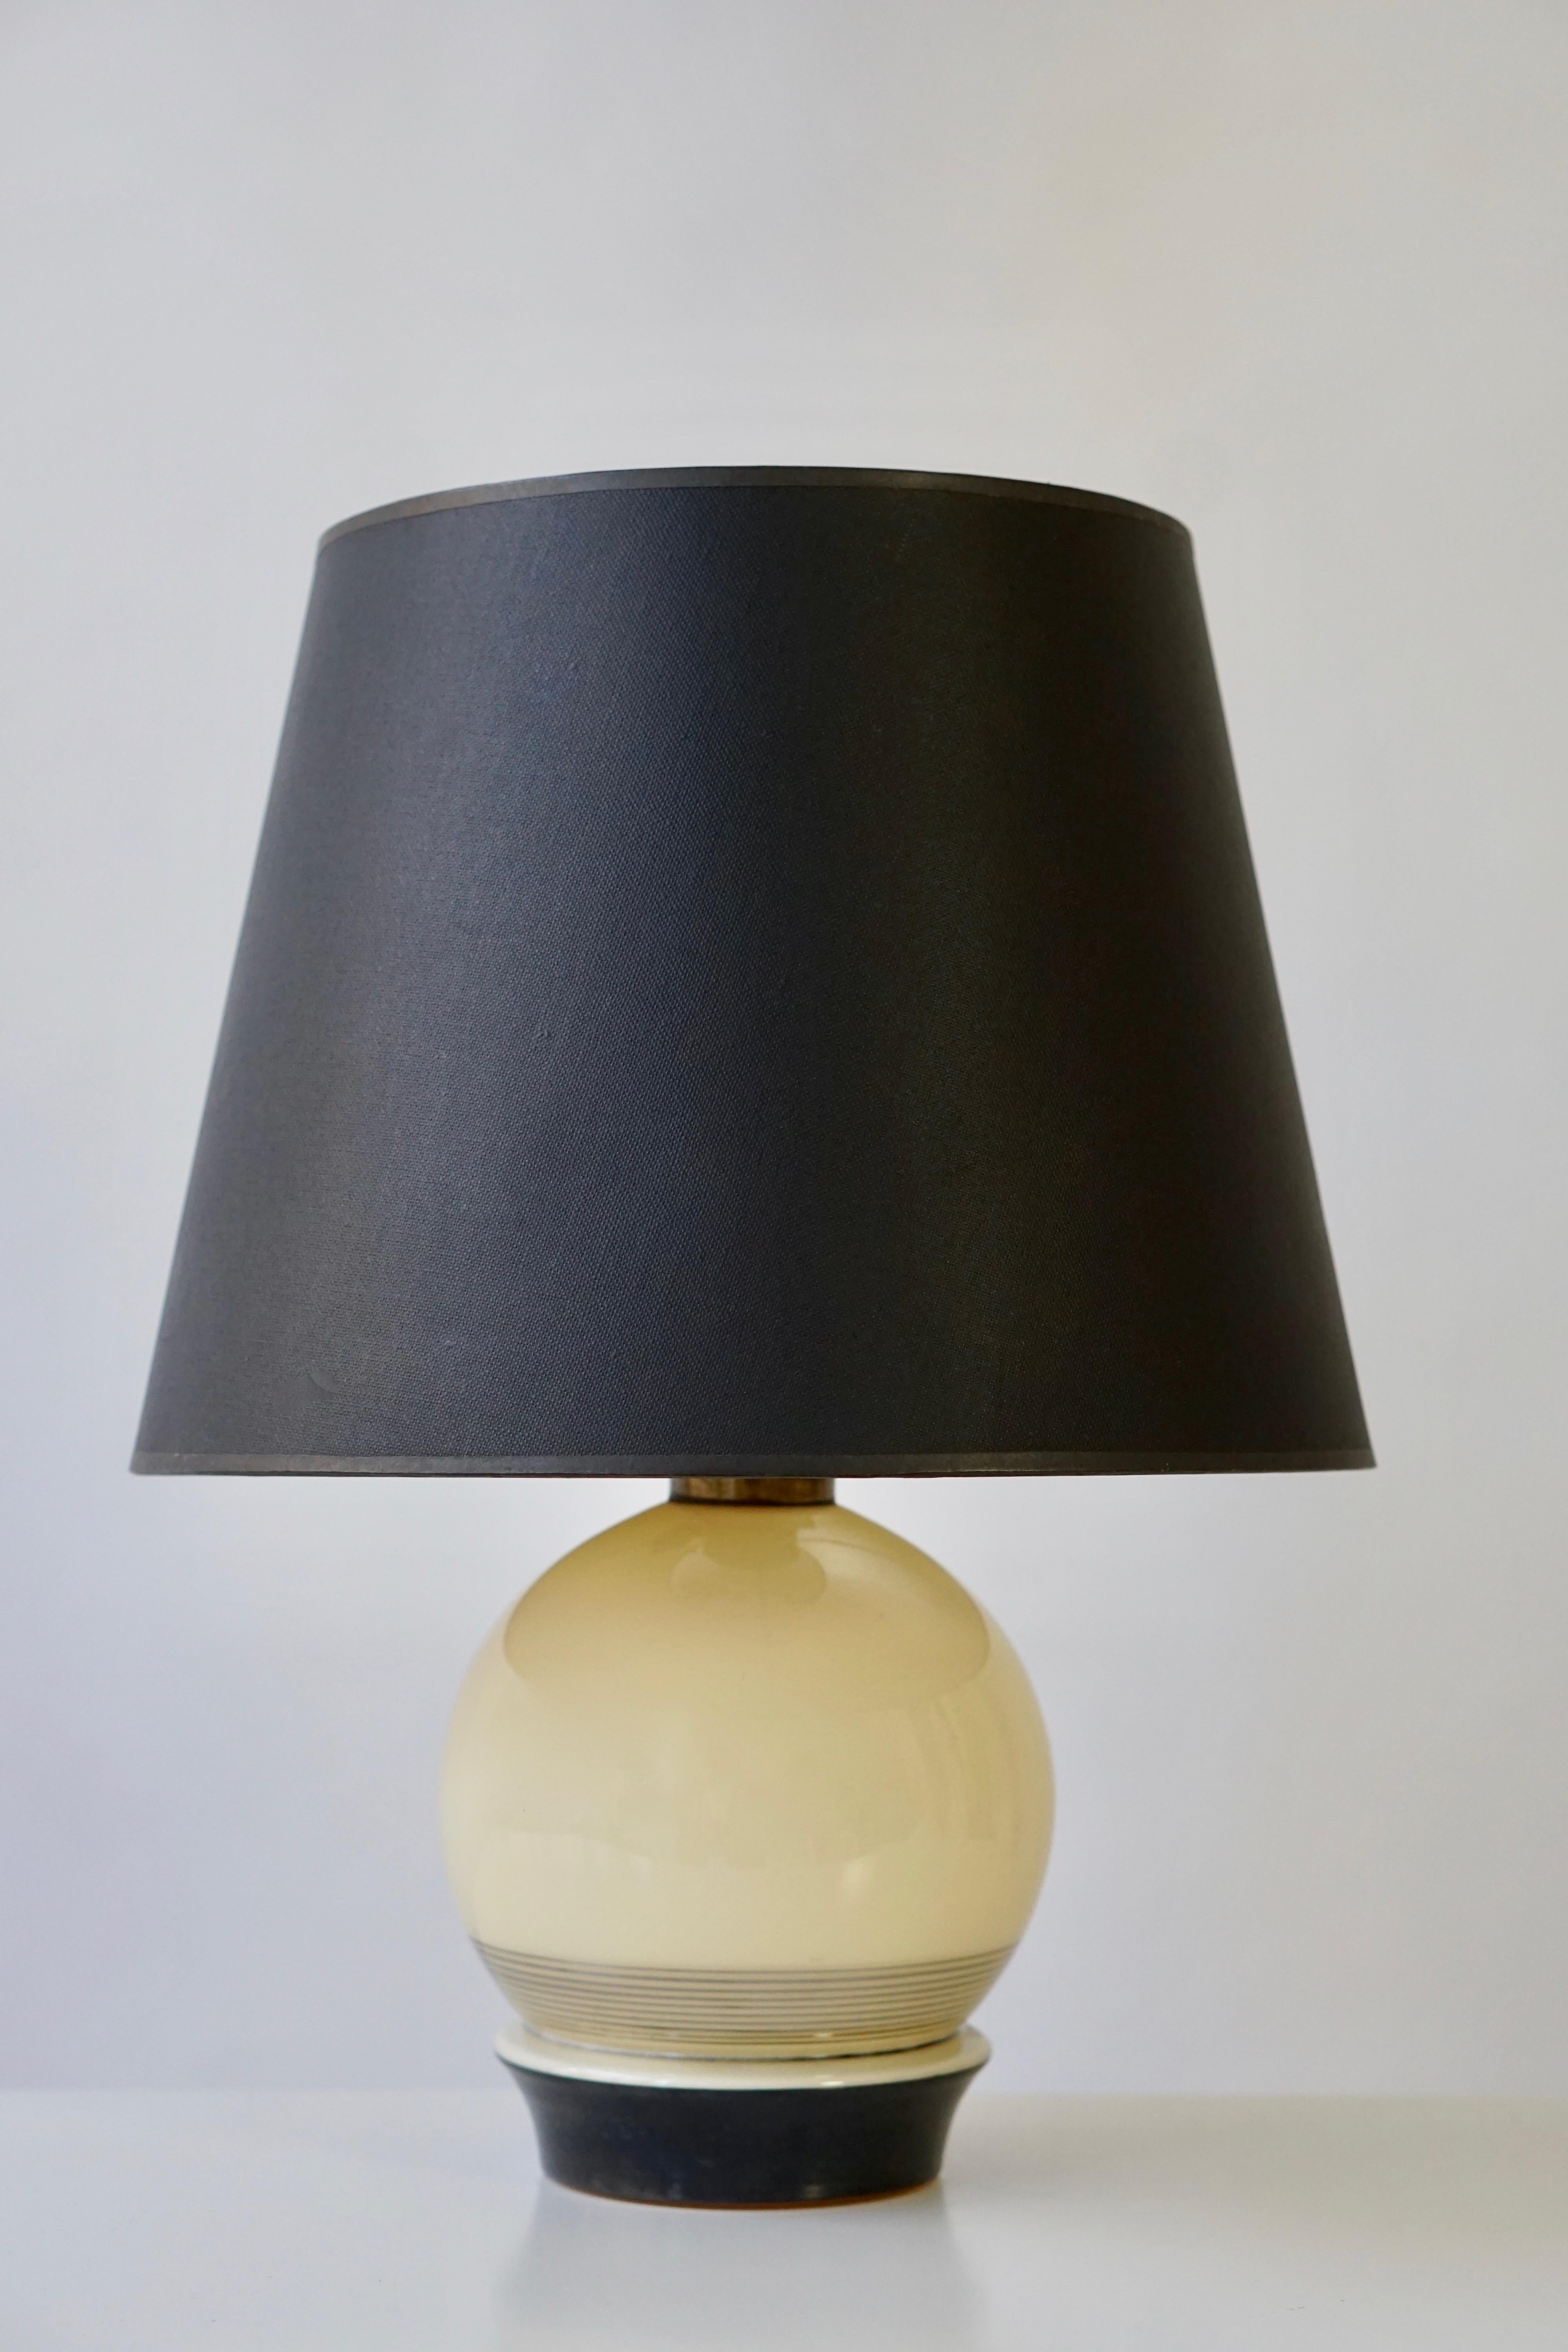 Italian Art Deco table lamp.
Measures: Diameter 14 cm.
Height with socket 23 cm.
One E27 bulb.

Lamp shade are not included in the price.